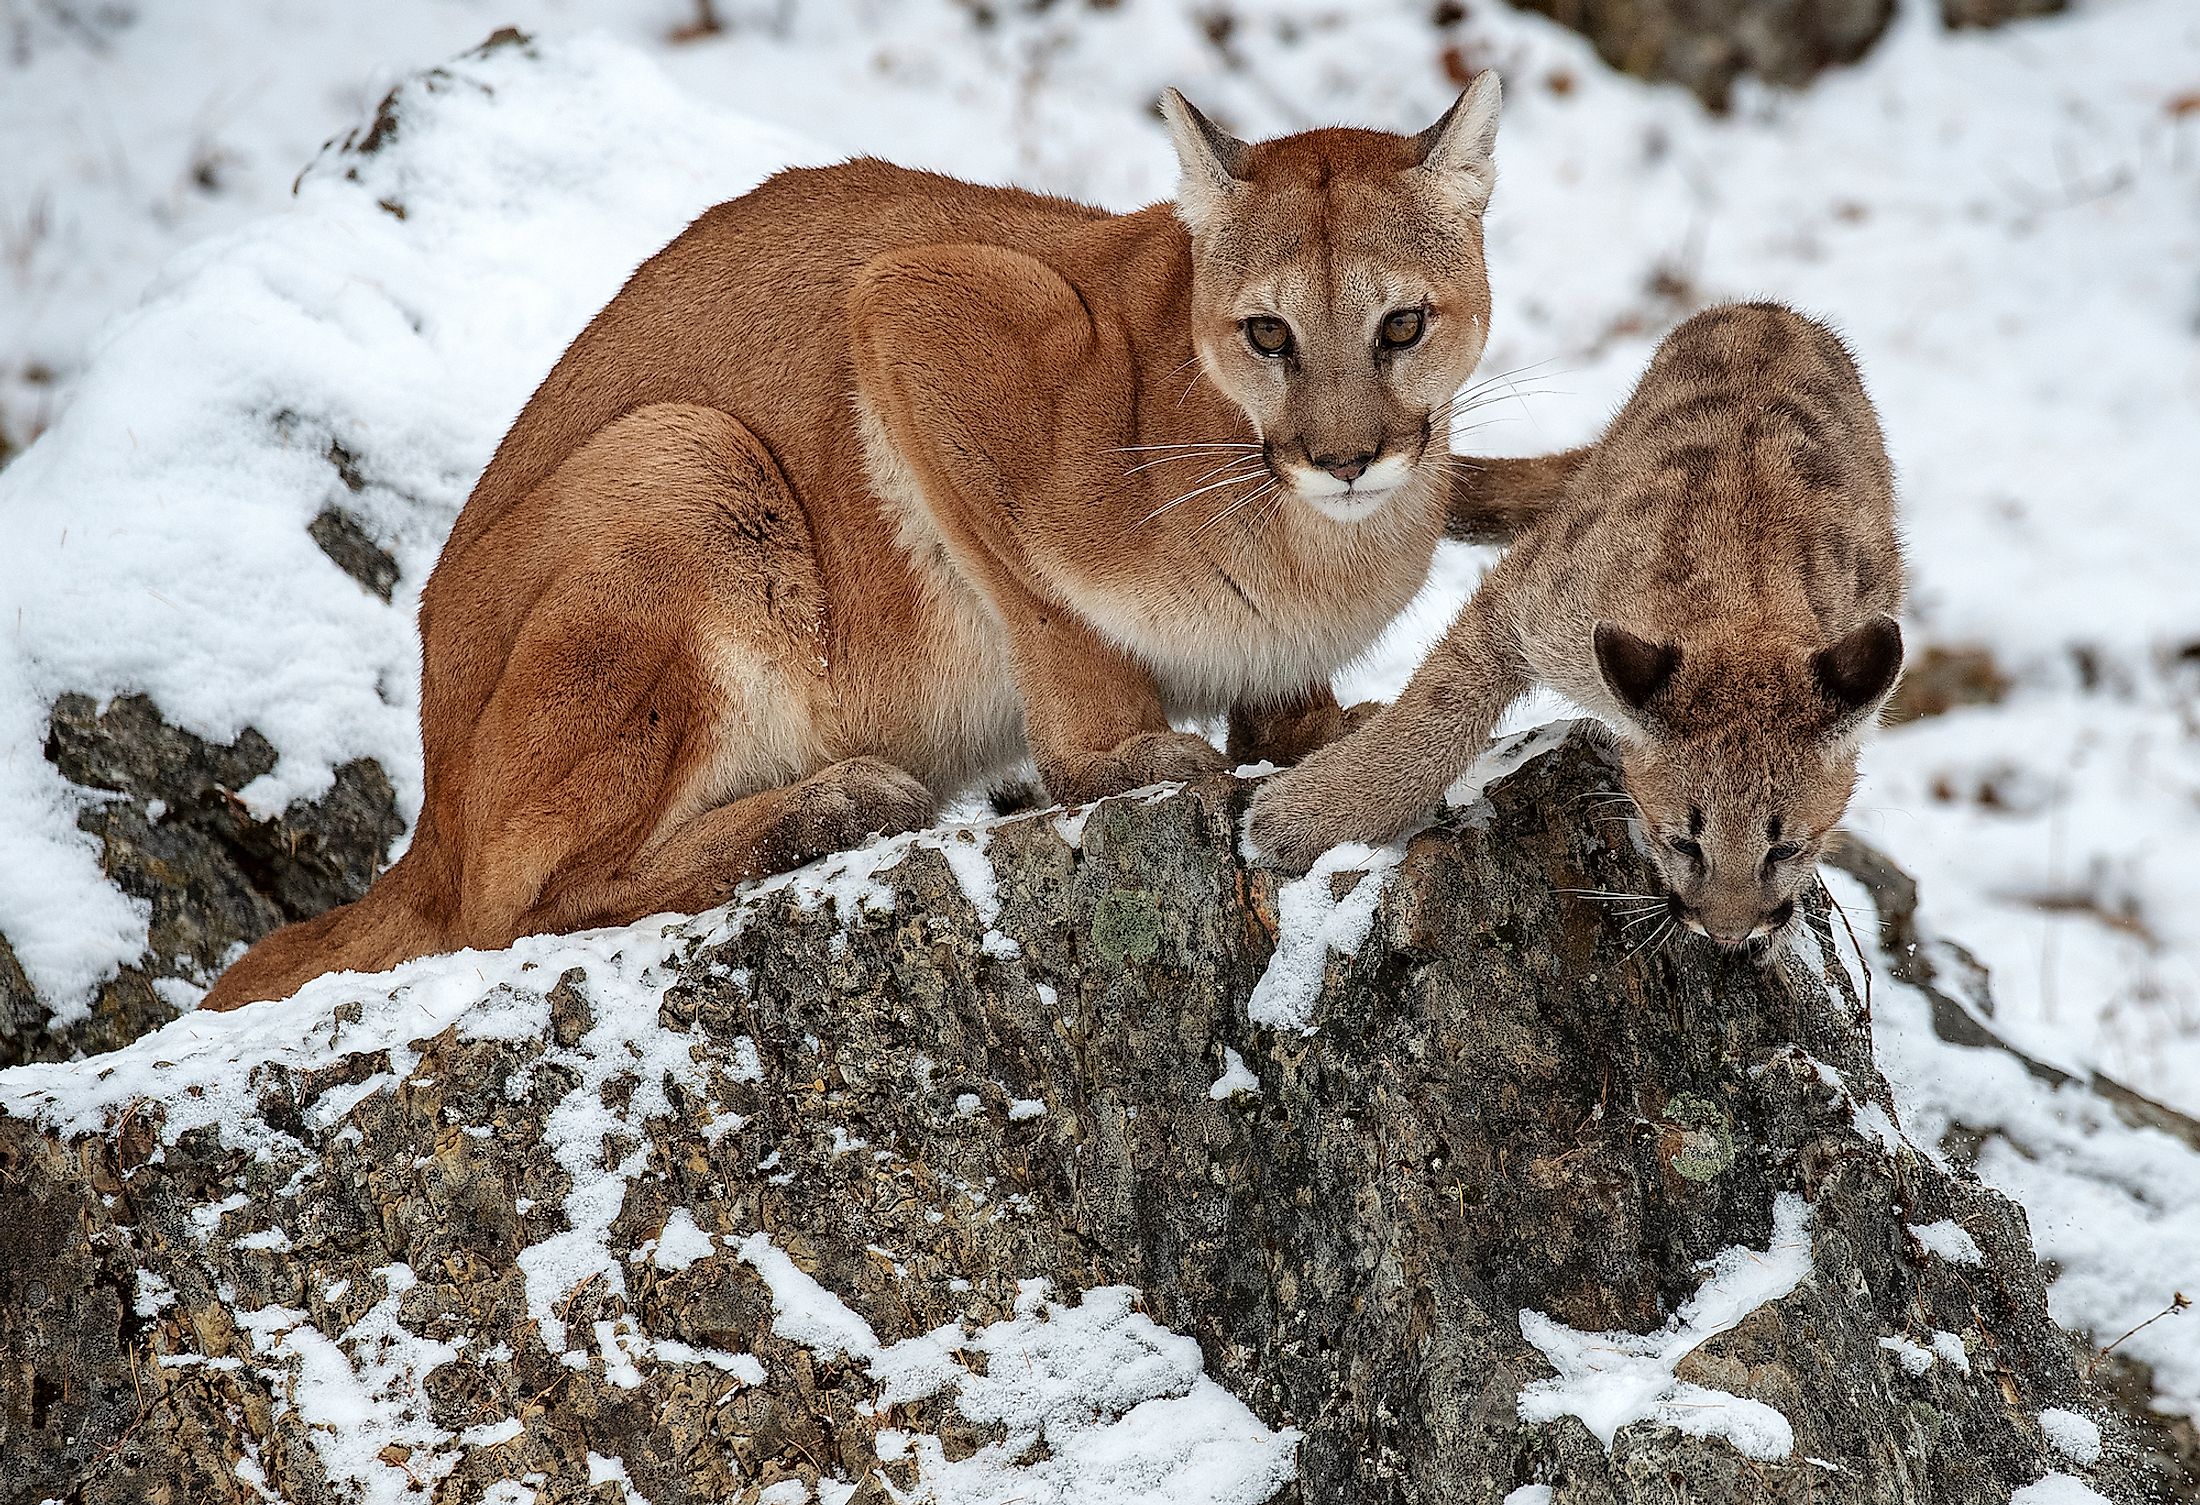 A mountain lion with cub.